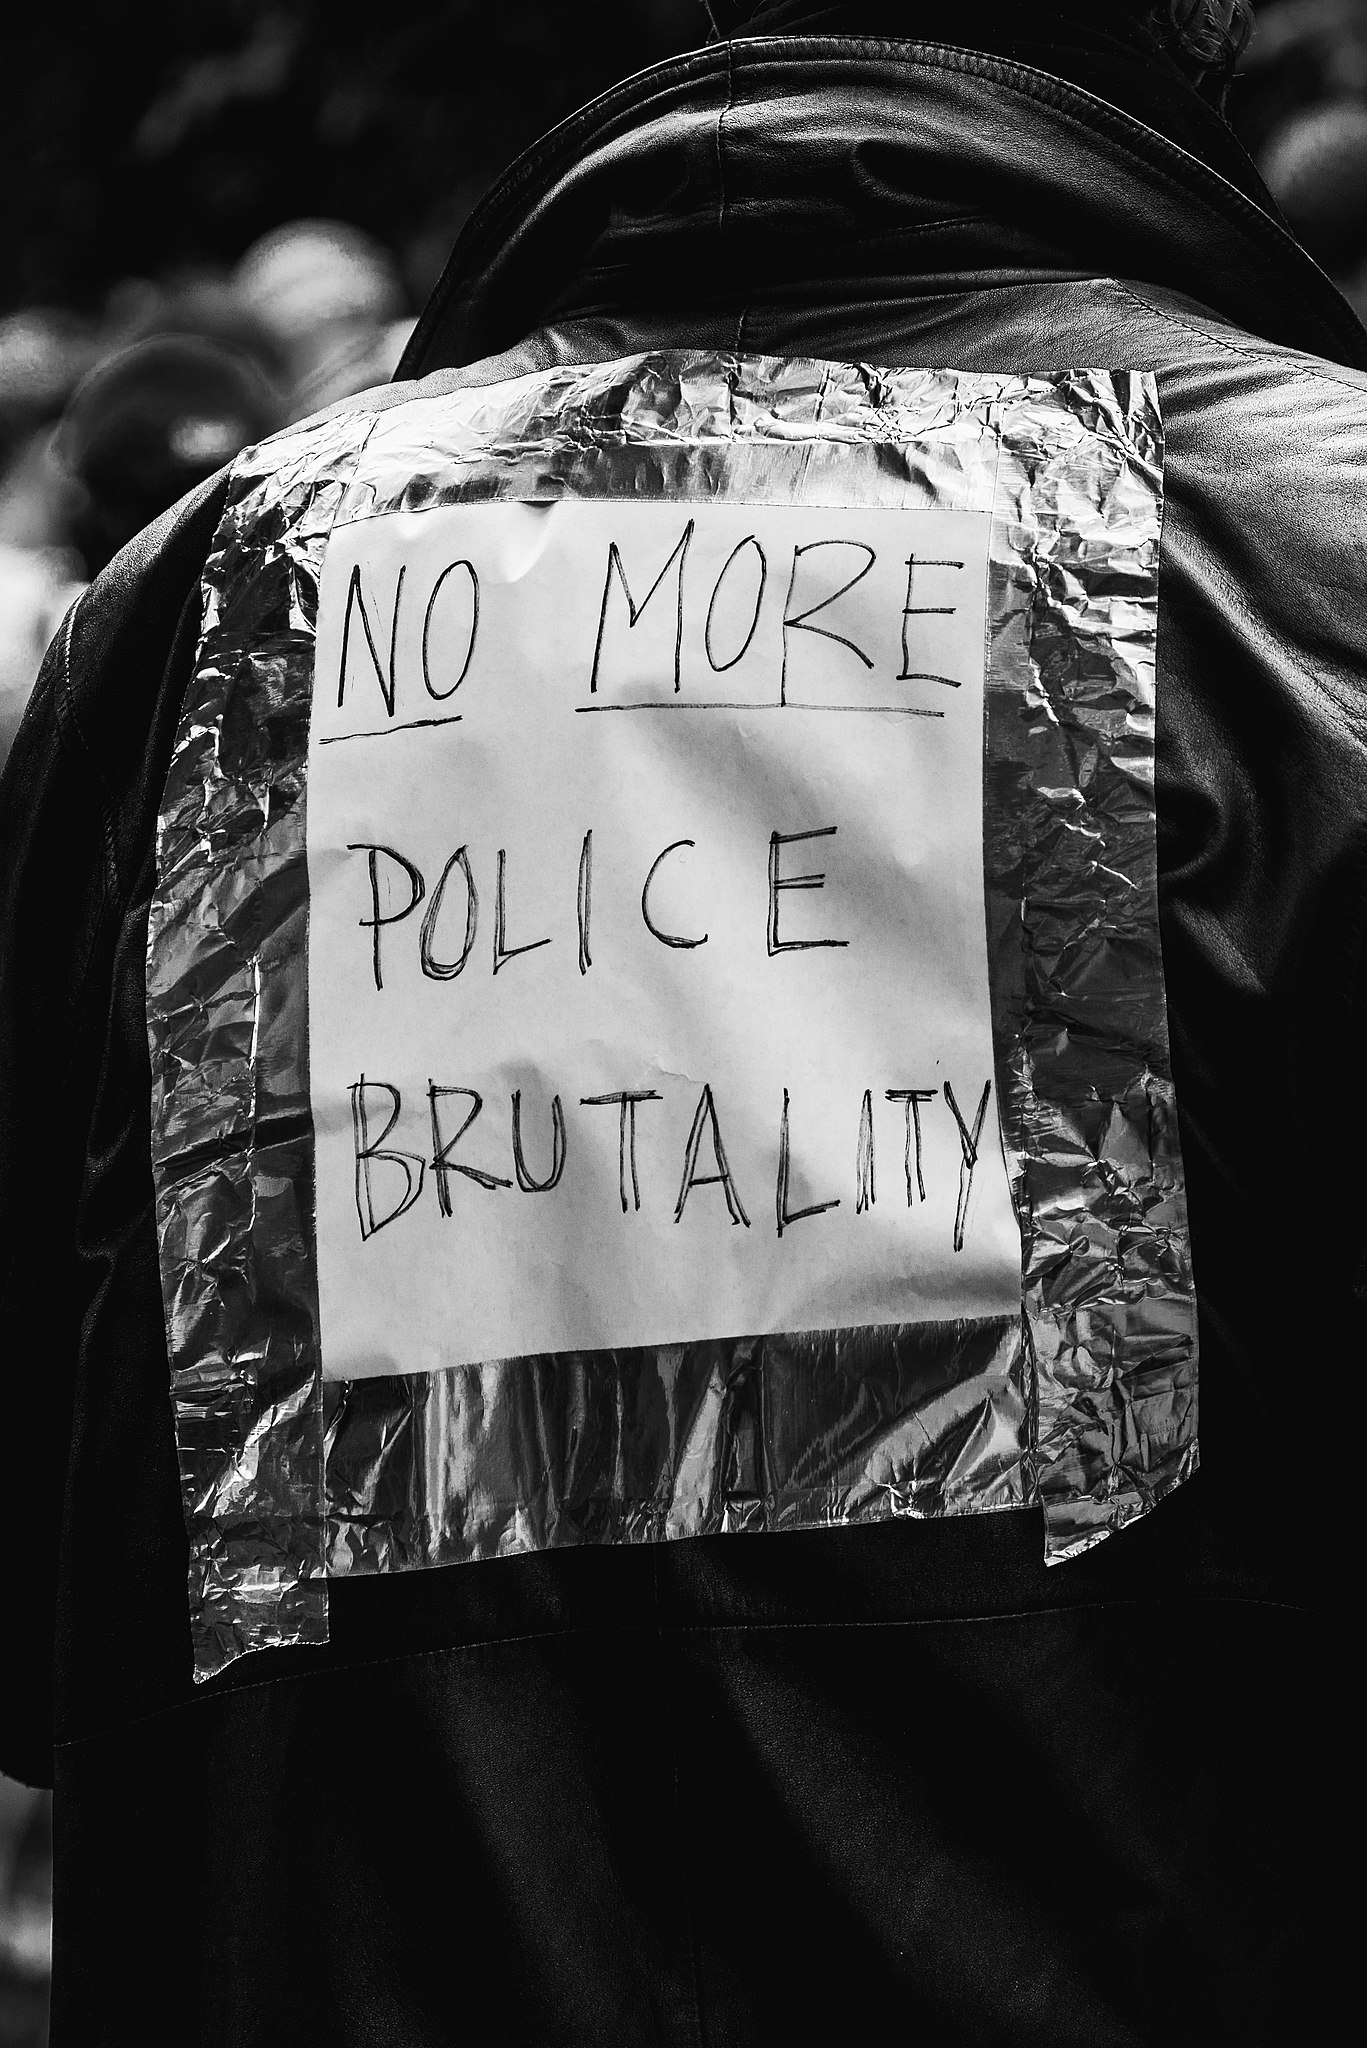 Text on a jacket reading "No more police brutality." Taken at racial justice protests in Toronto in 2020 by Jason Hargrove, obtained via Wikimedia.